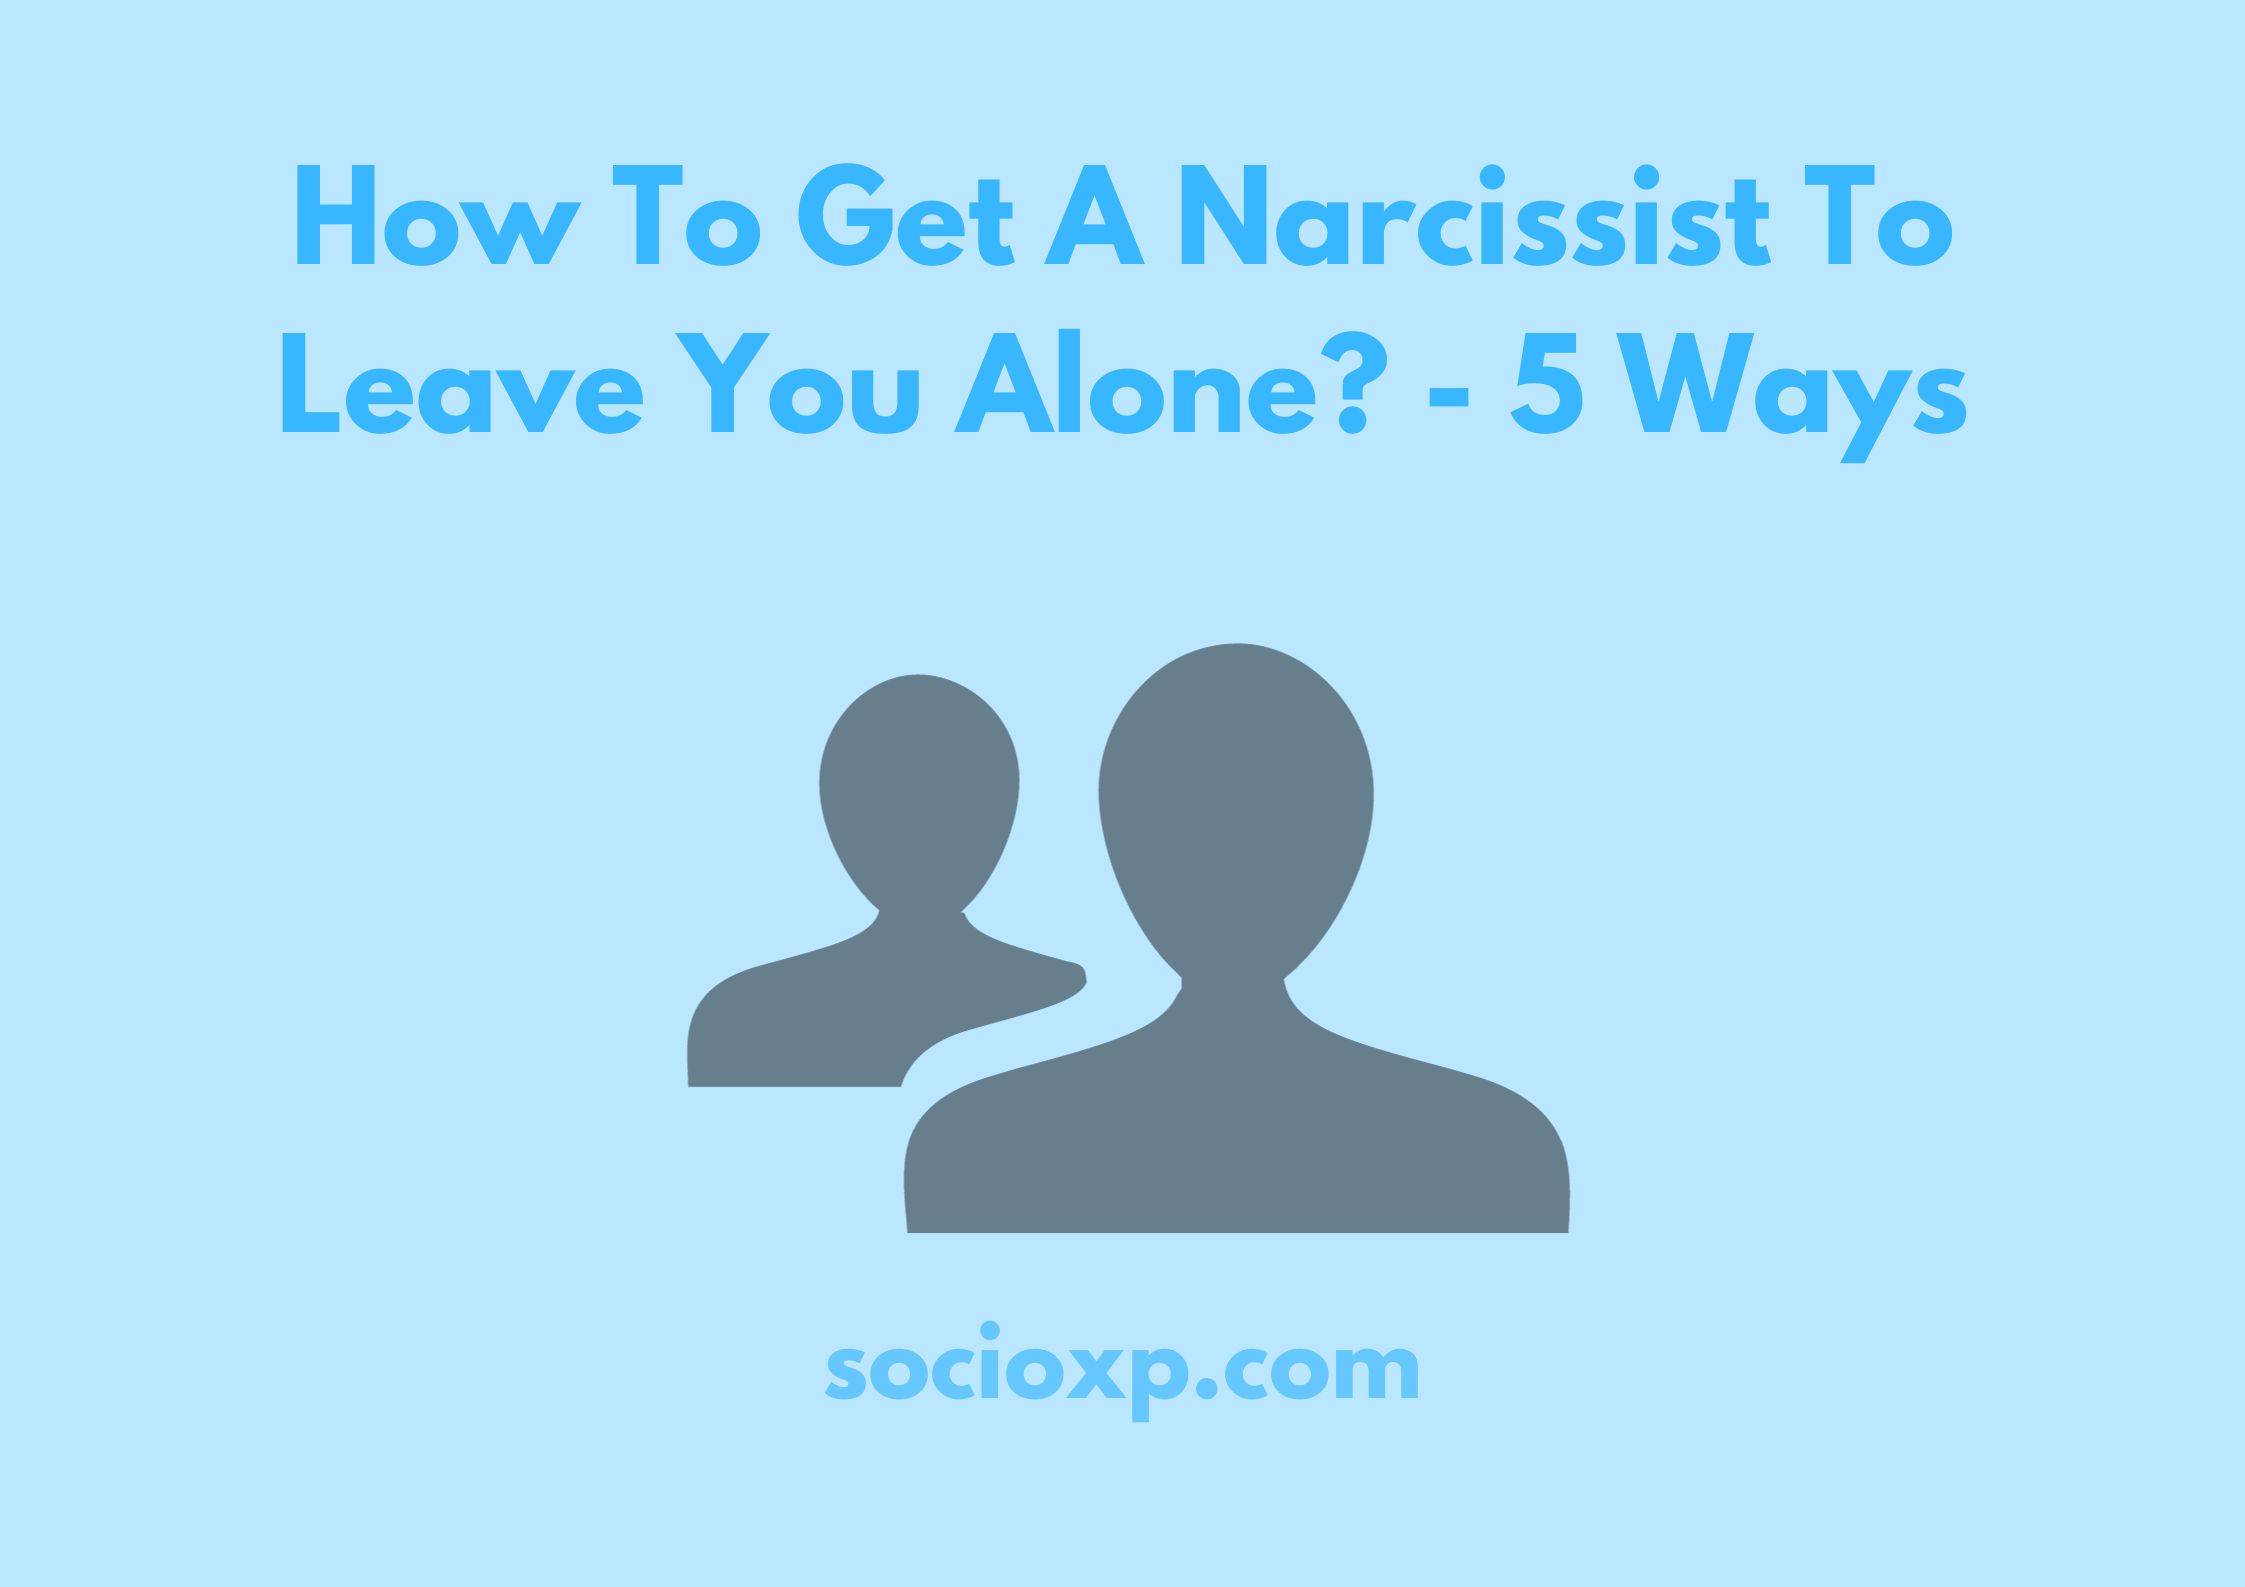 How To Get A Narcissist To Leave You Alone? - 5 Ways